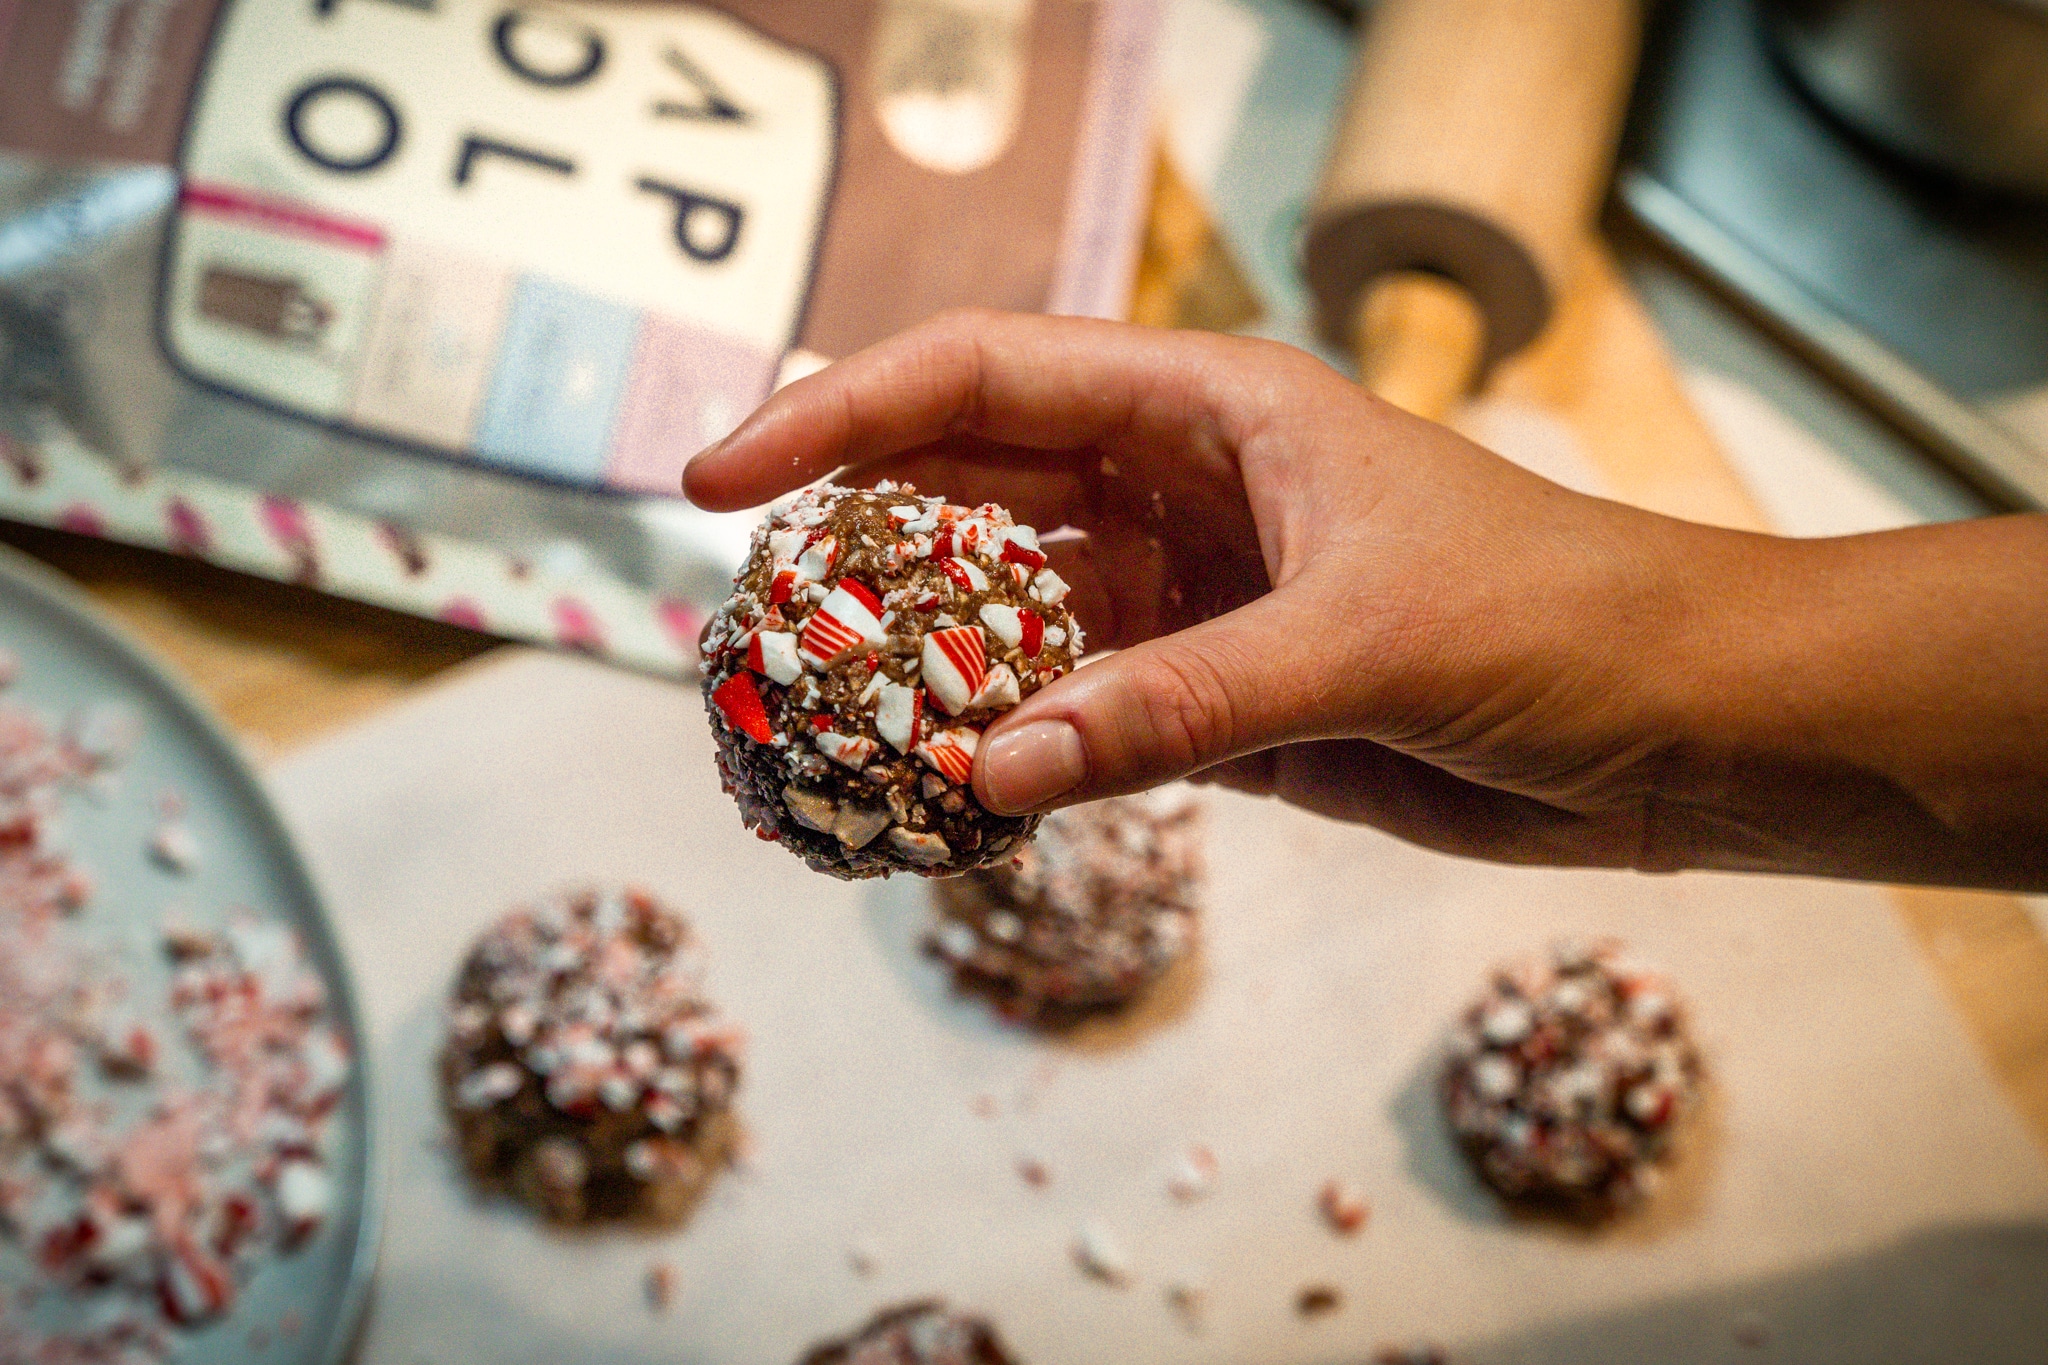 woman's hand holding a homemade protein ball snack with candy cane coating